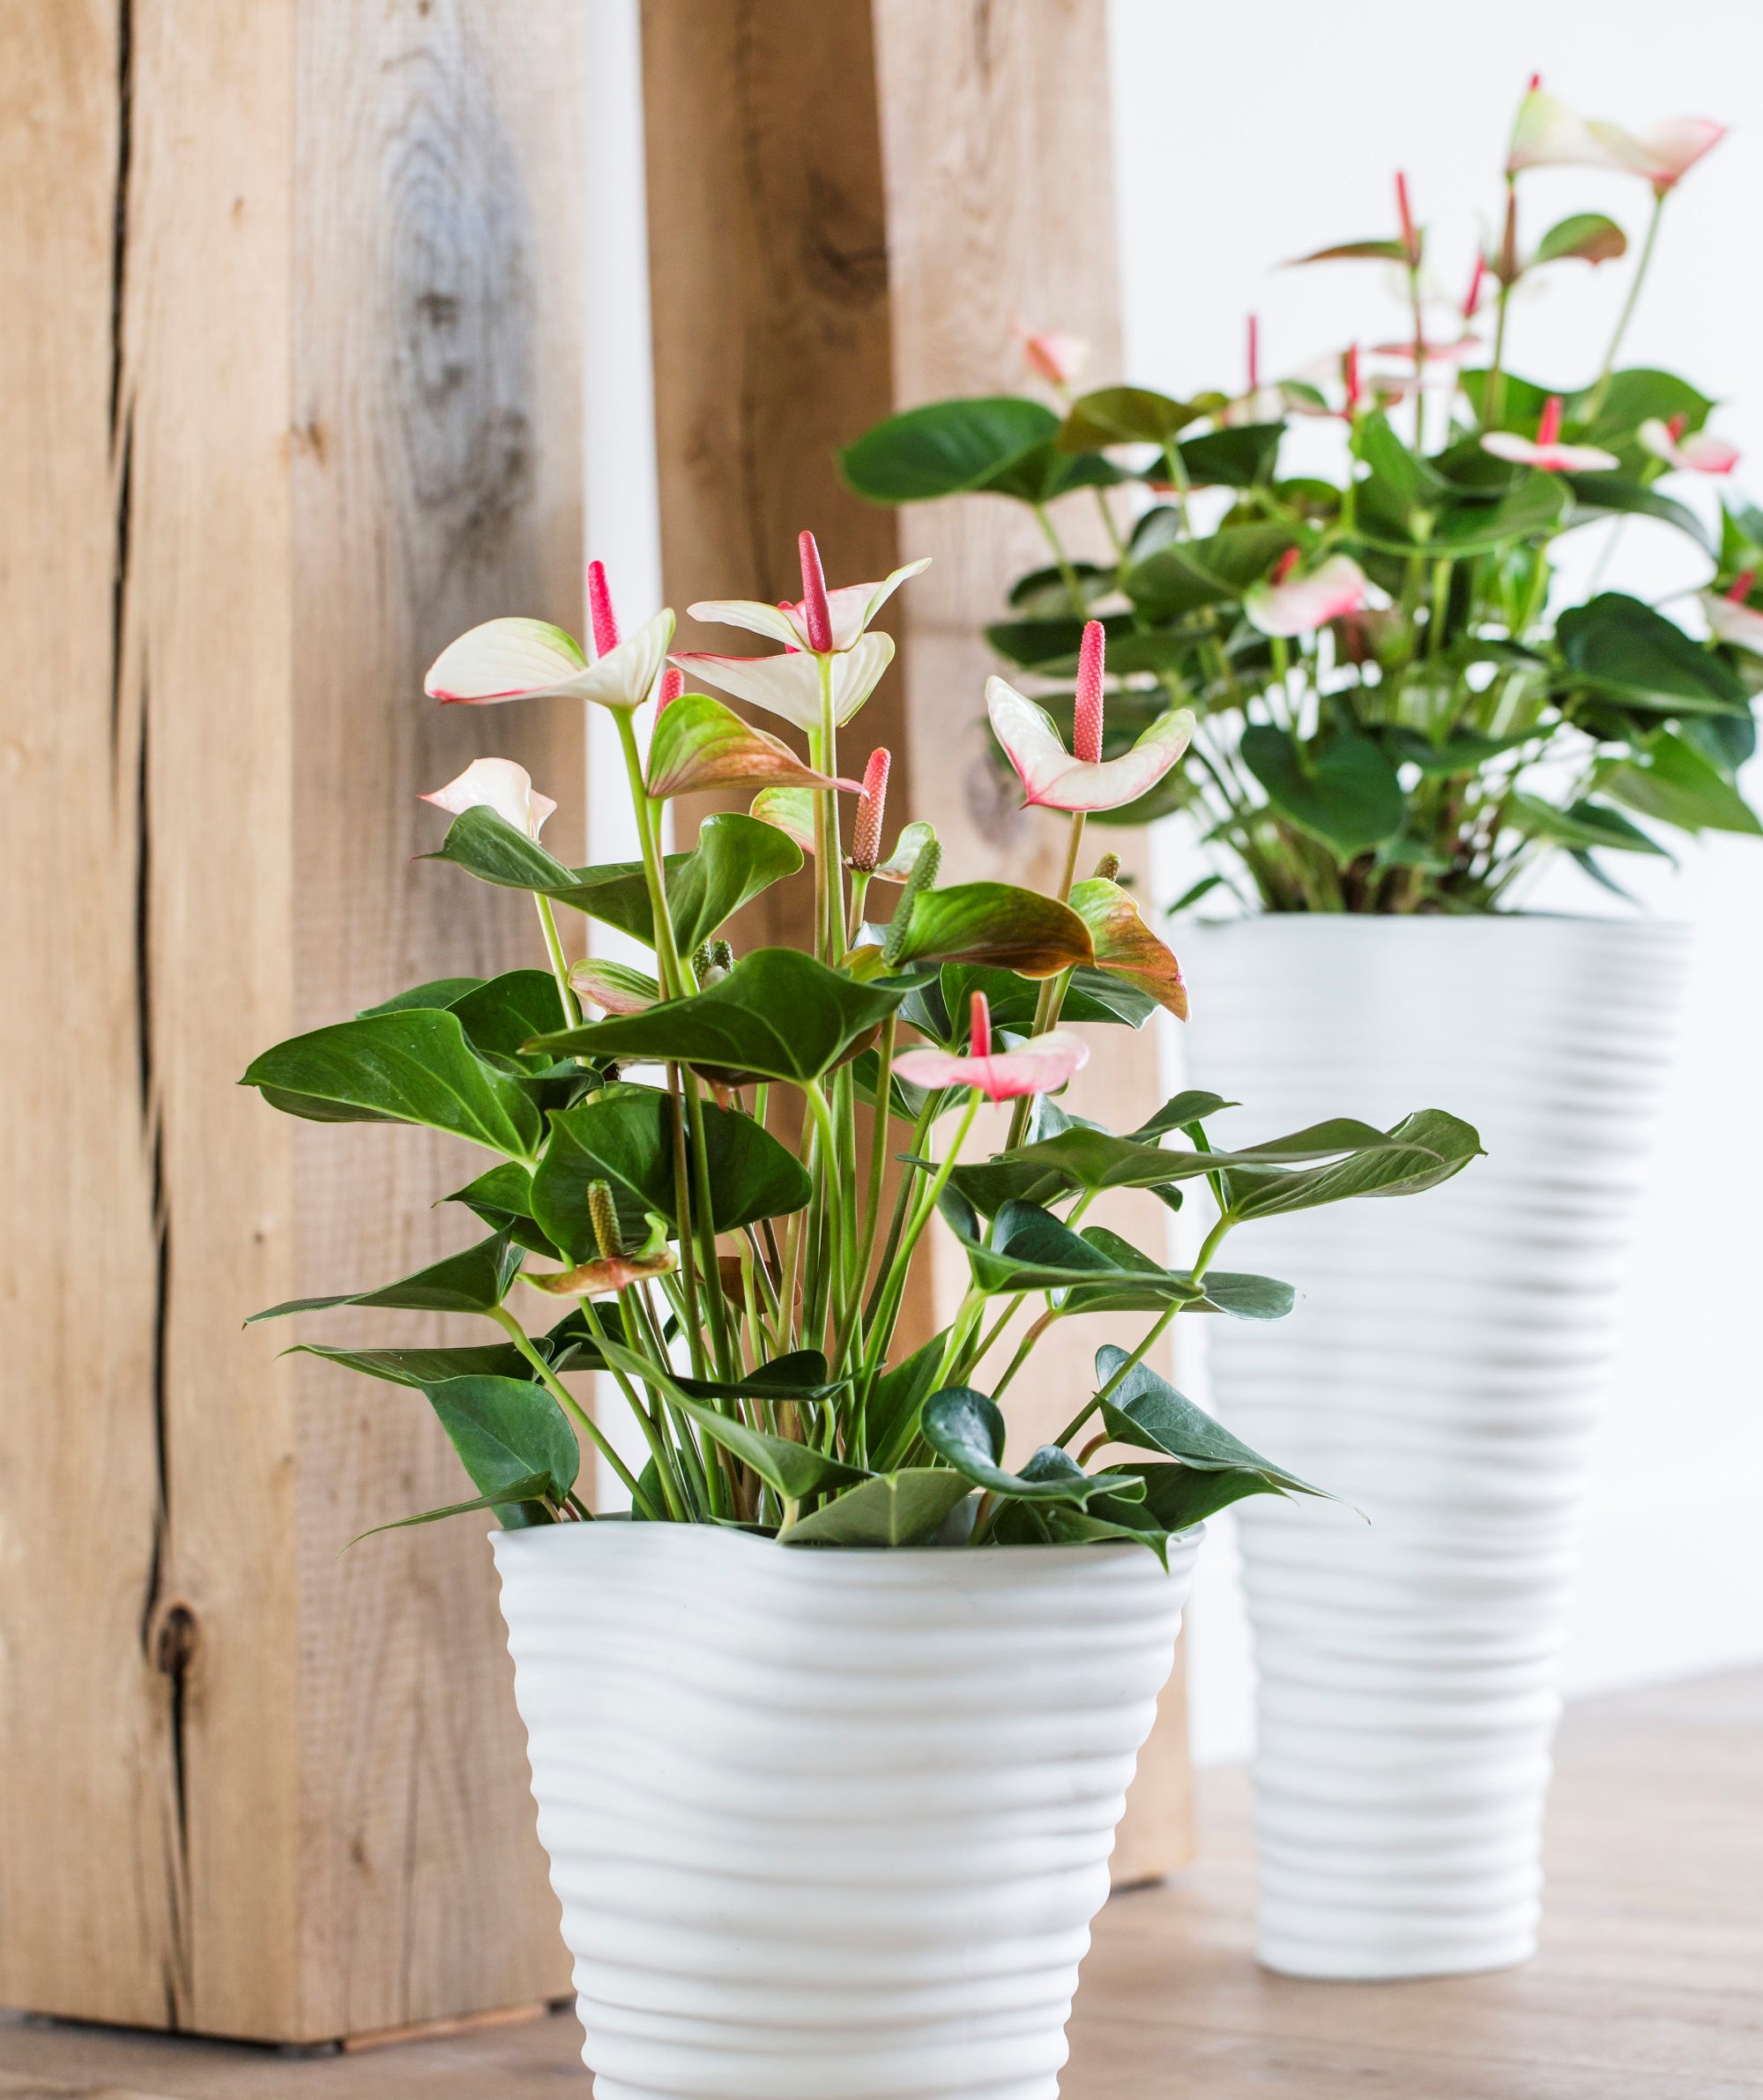 5 Interesting Facts About The Anthurium Pot Plant And Cut Flower